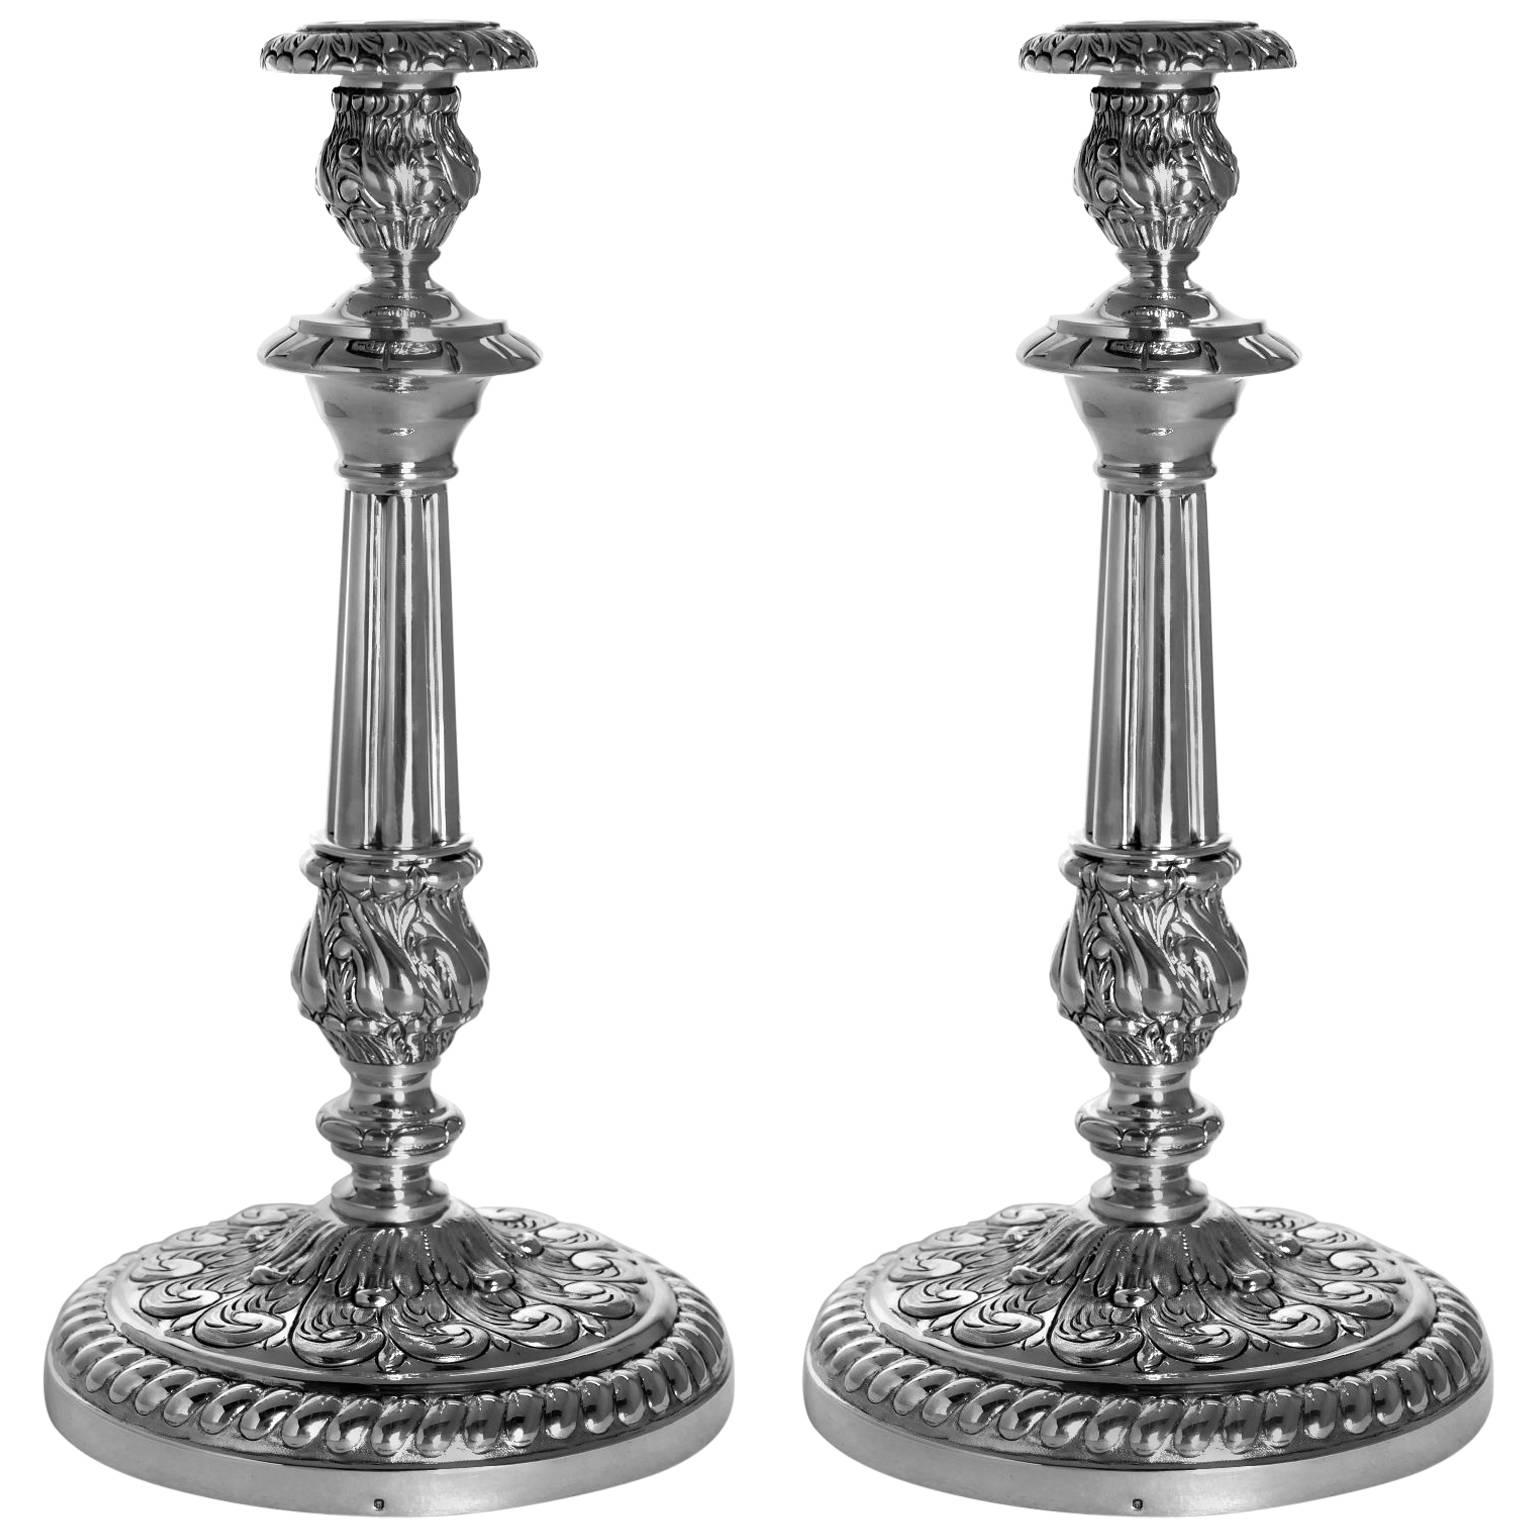 Boivin Imposing French Sterling Silver Candlesticks Pair, Rococo